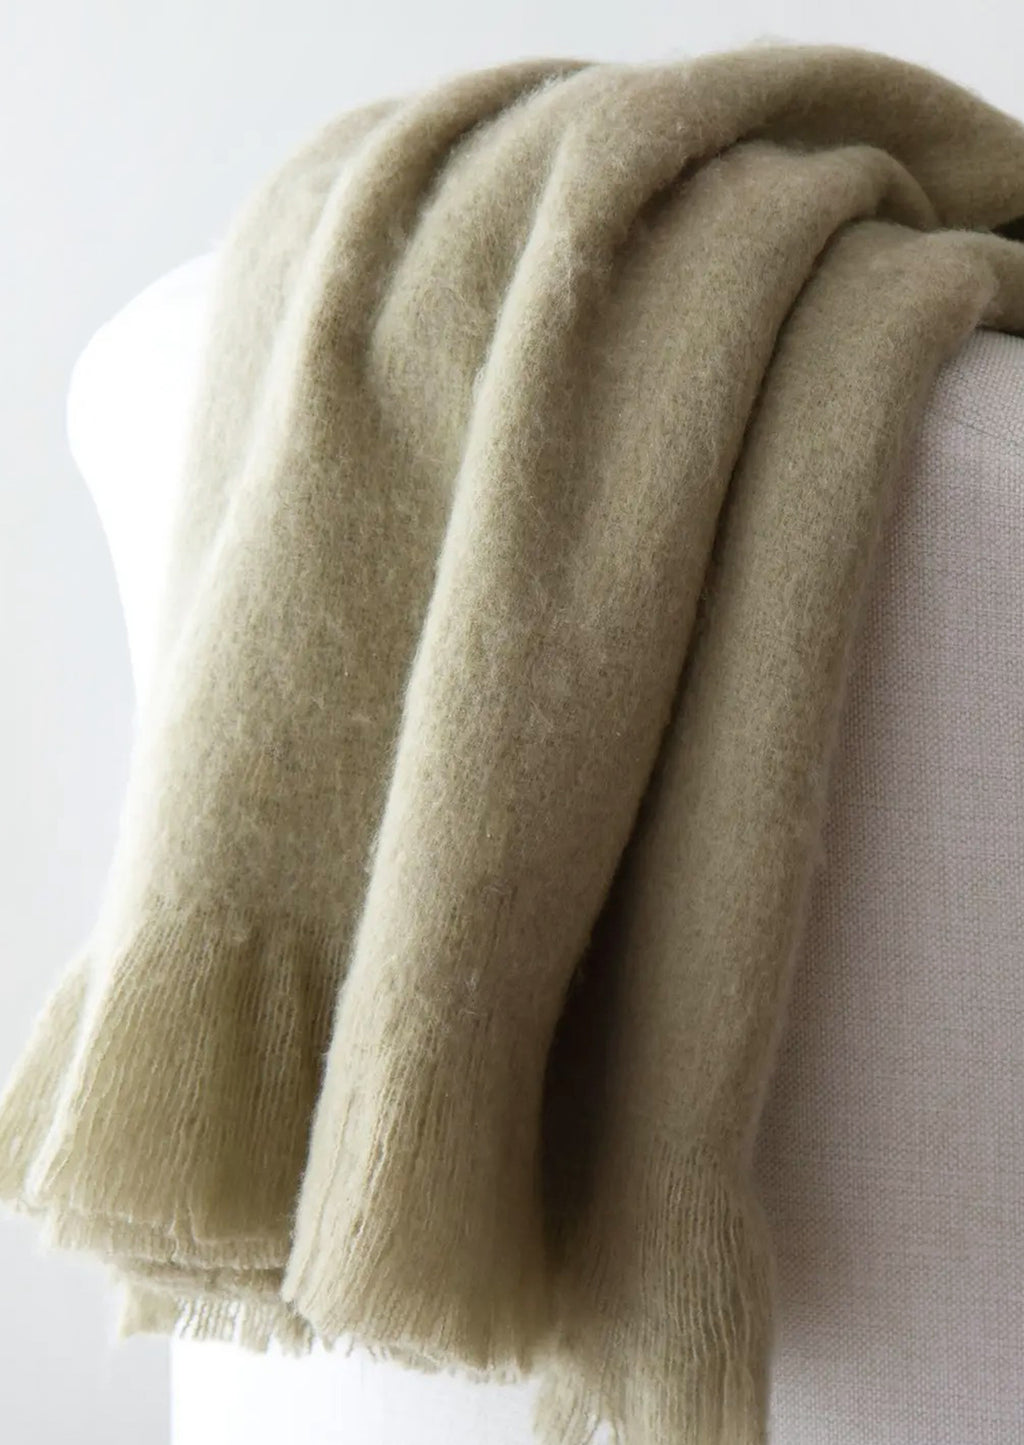 Sage: A sage green mohair throw blanket draped over a chair.